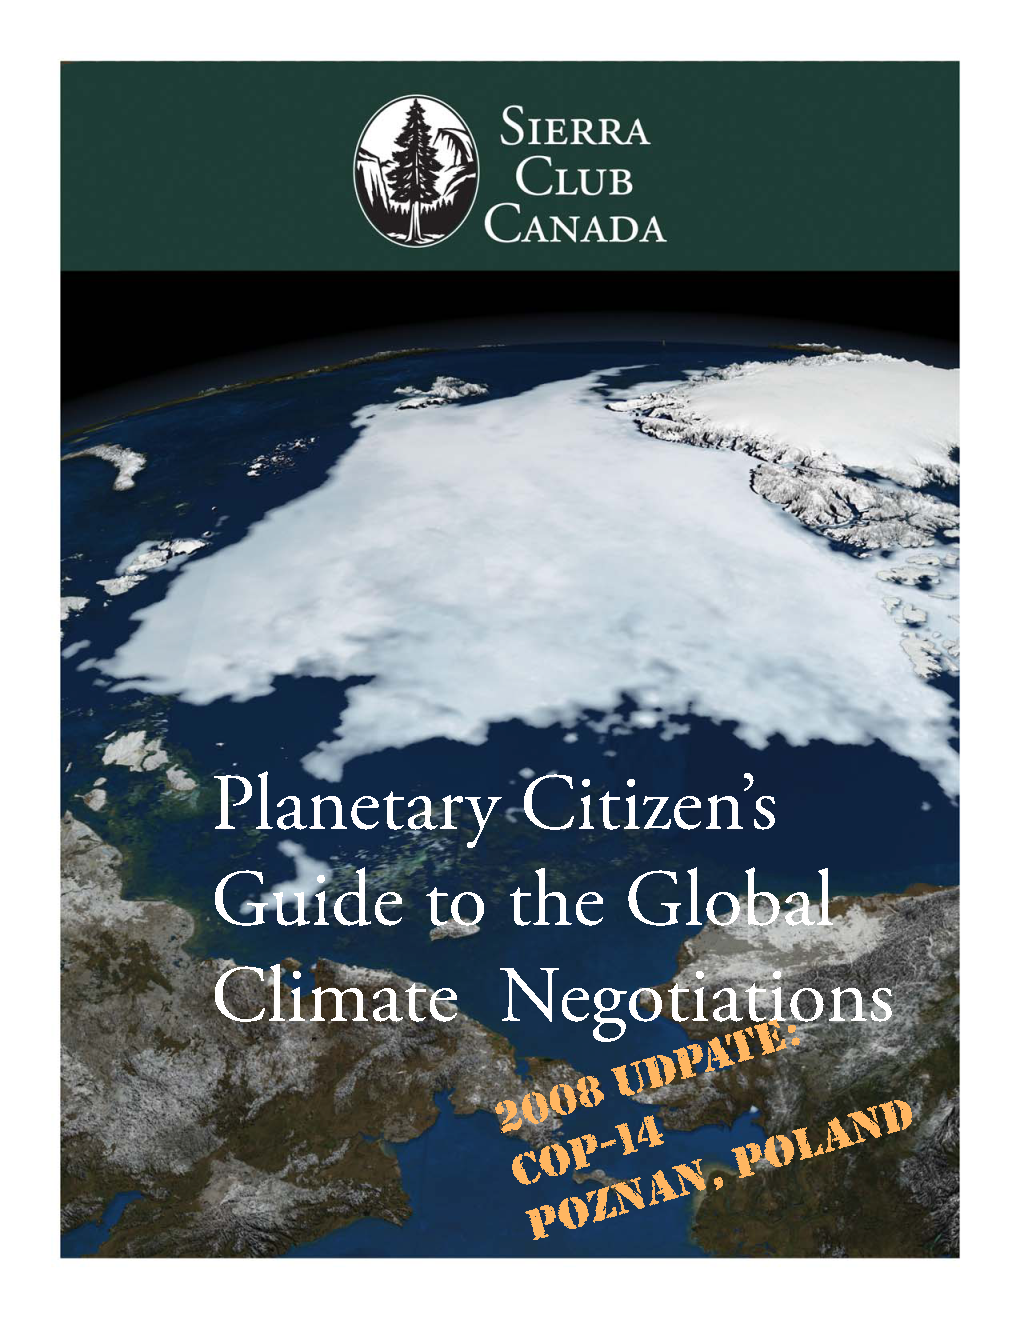 Planetary Citizen's Guide to the Global Climate